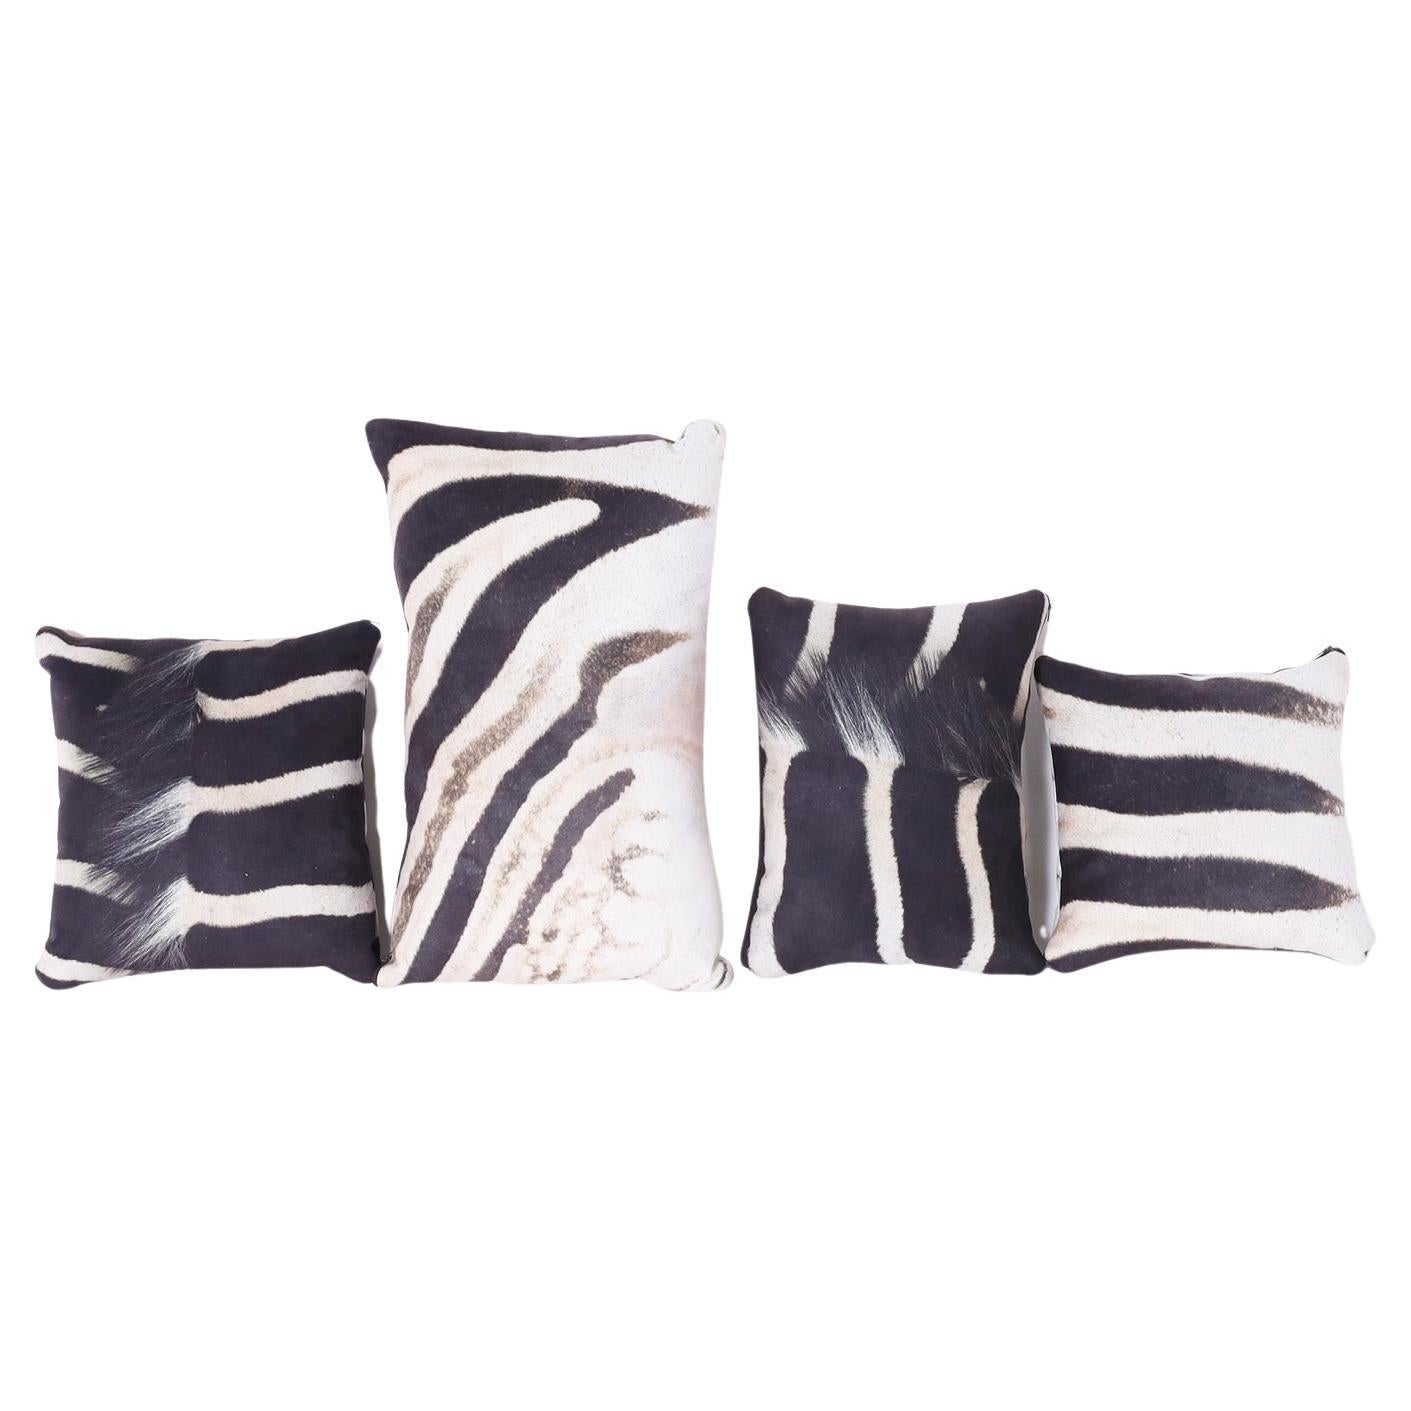 *Two British Colonial Style Zebra Print Pillows, Priced Individually